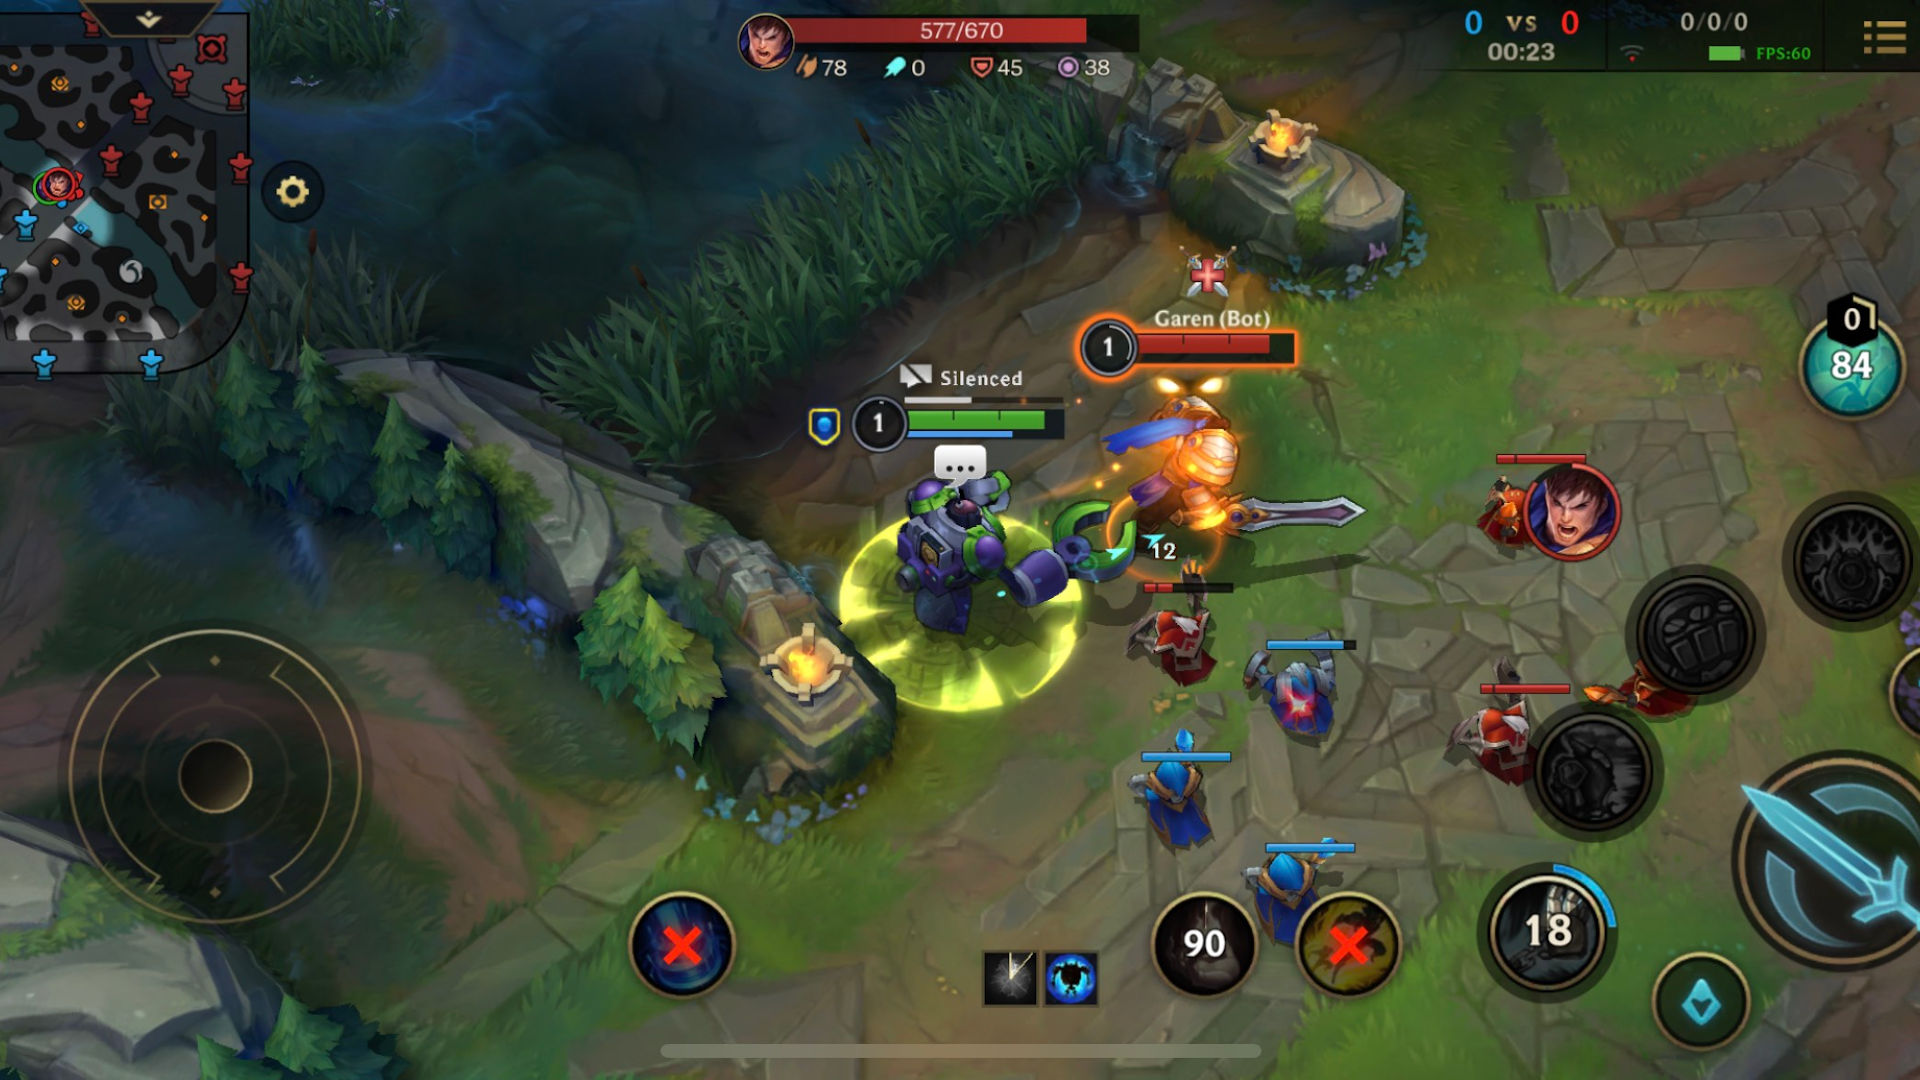 League of Legends: Wild Rift guide – classes, lanes, and items